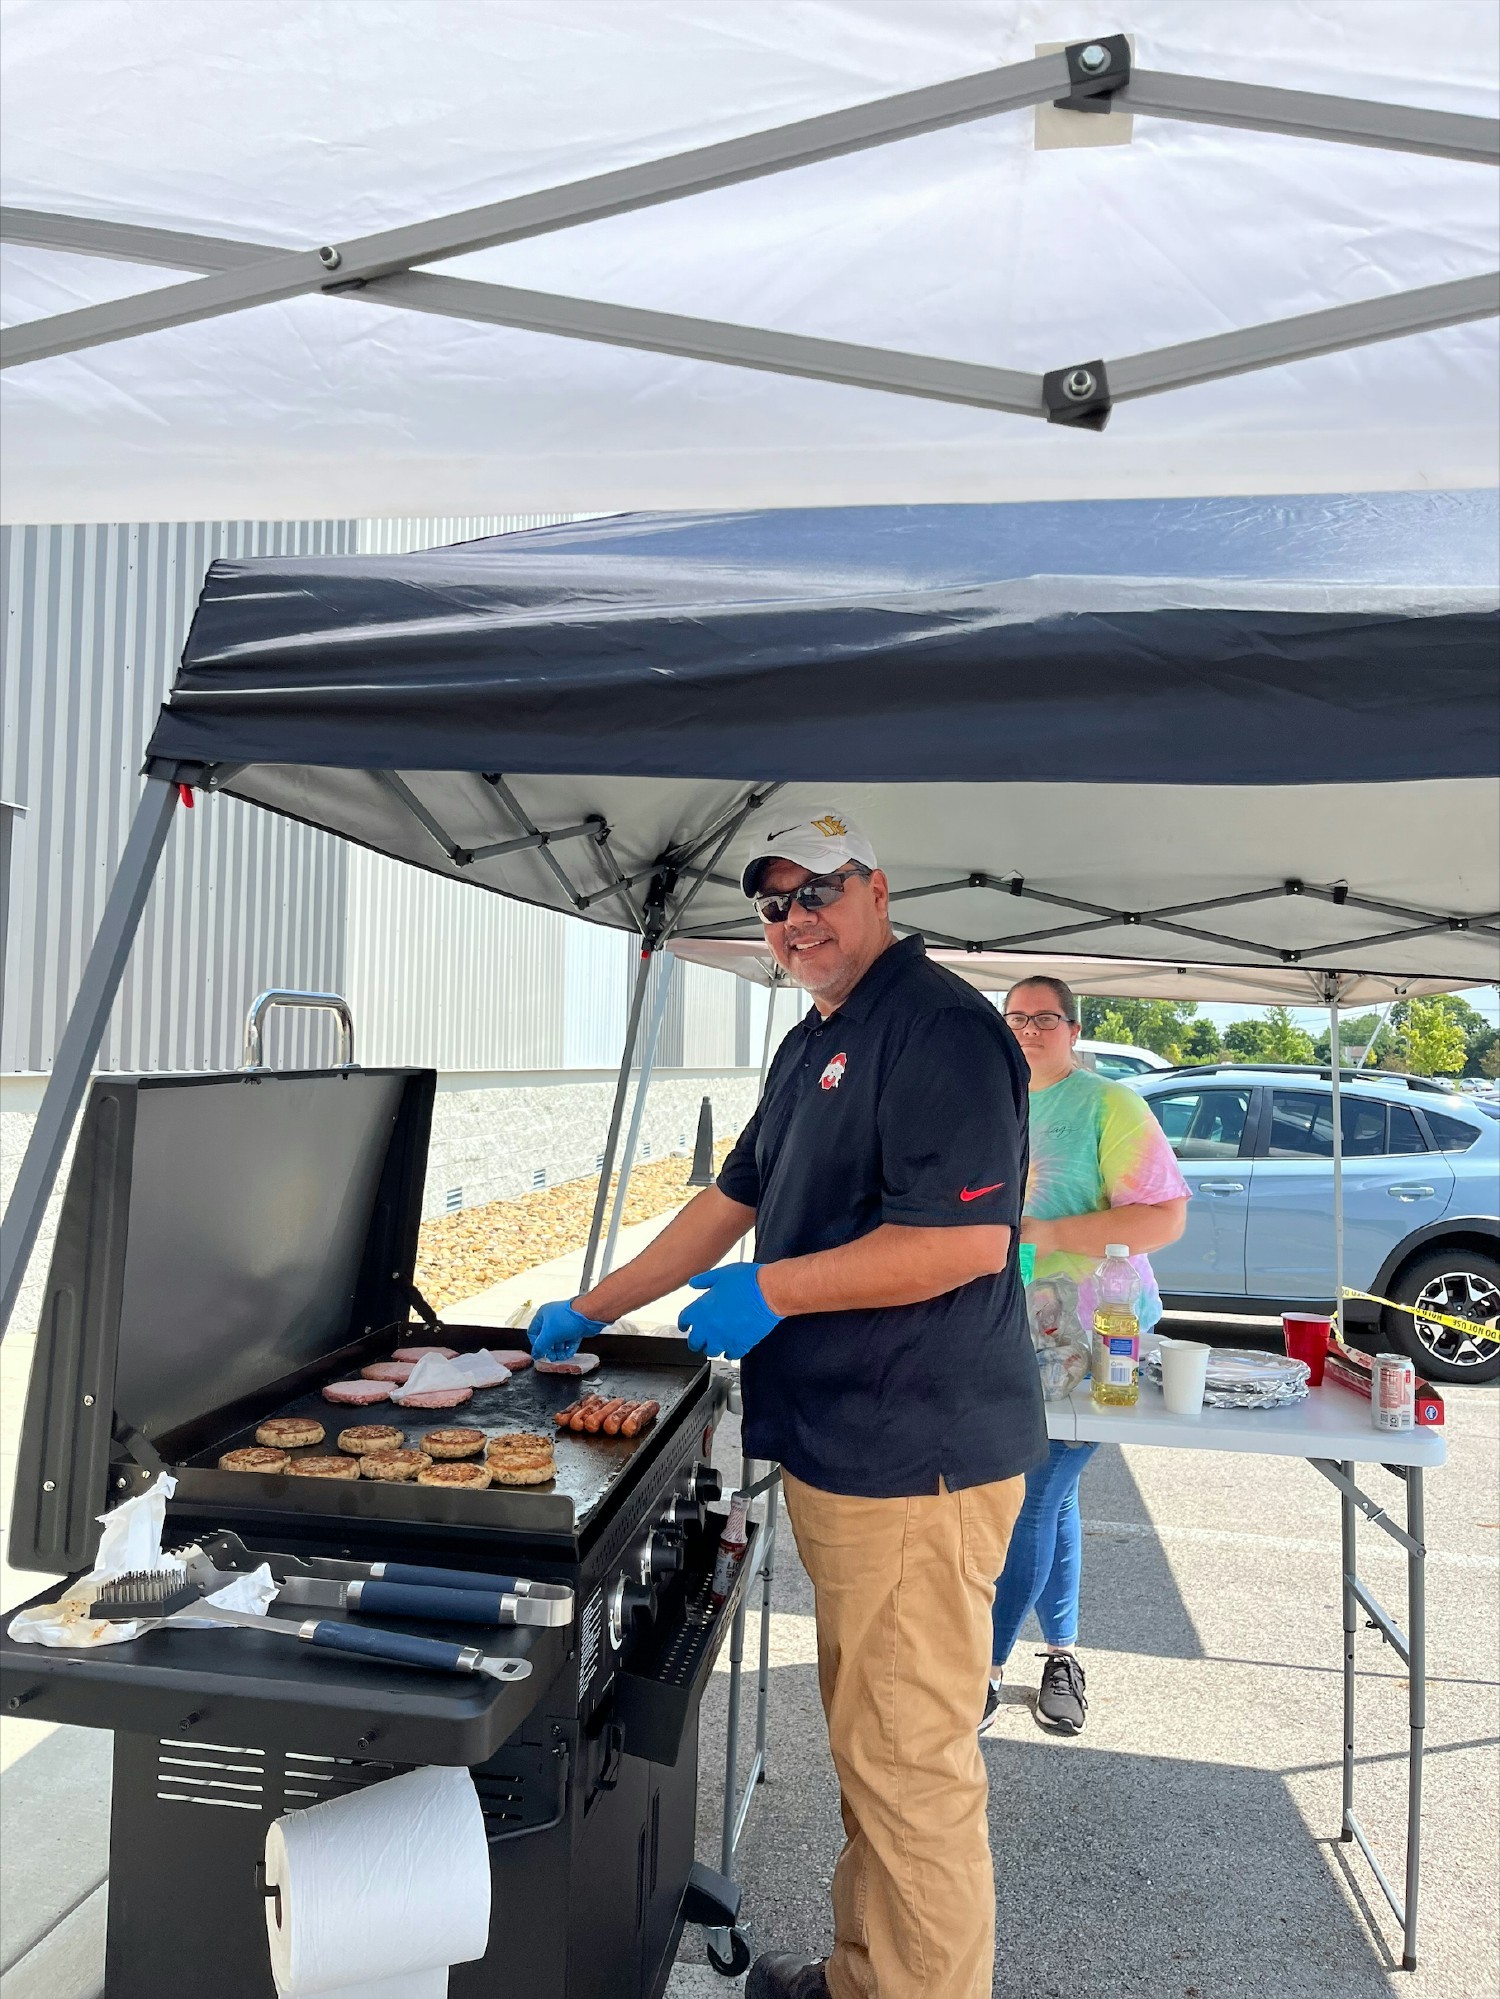 Our Maintenance Manager manning the grill during our 365 Day Accident-Free celebration!